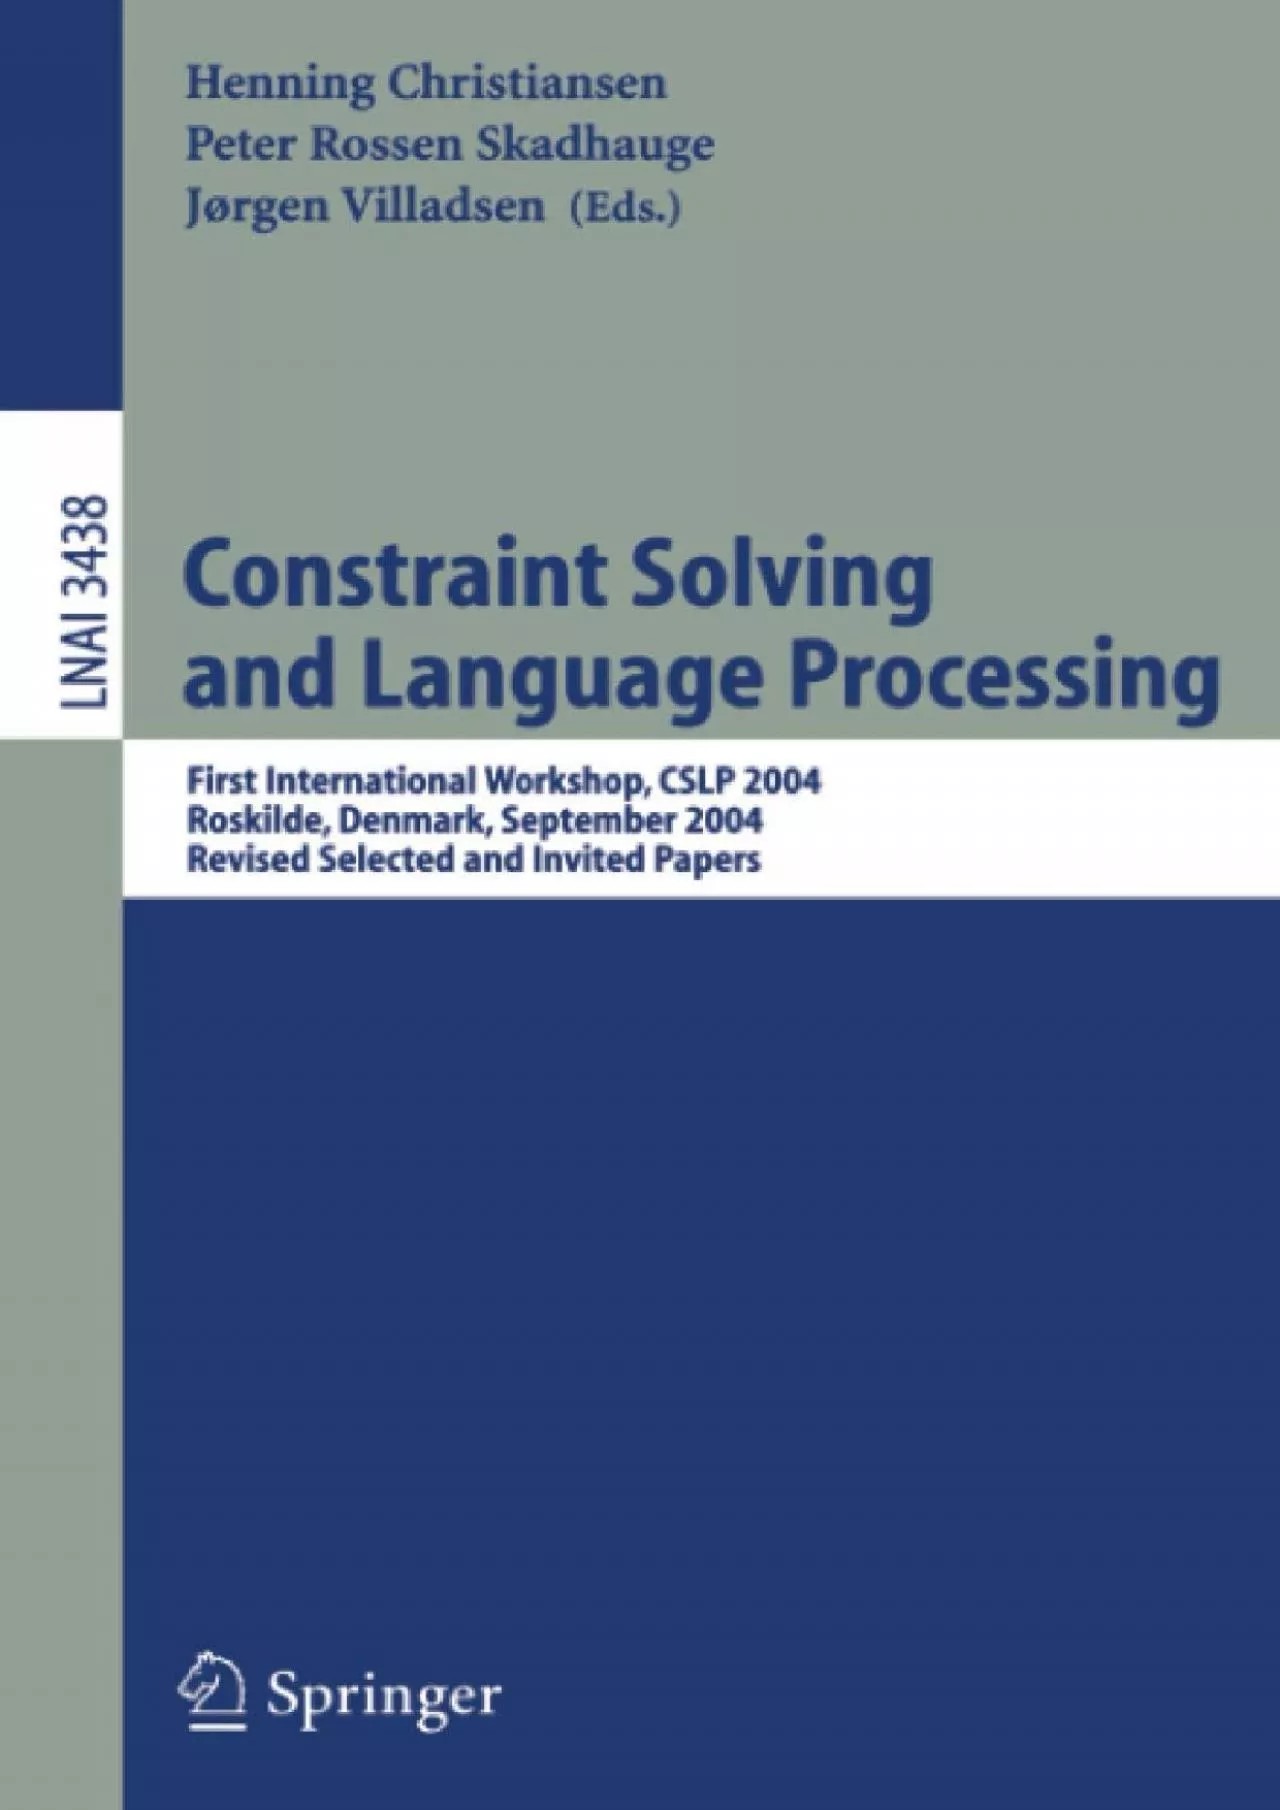 [eBOOK]-Constraint Solving and Language Processing: First International Workshop, CSLP